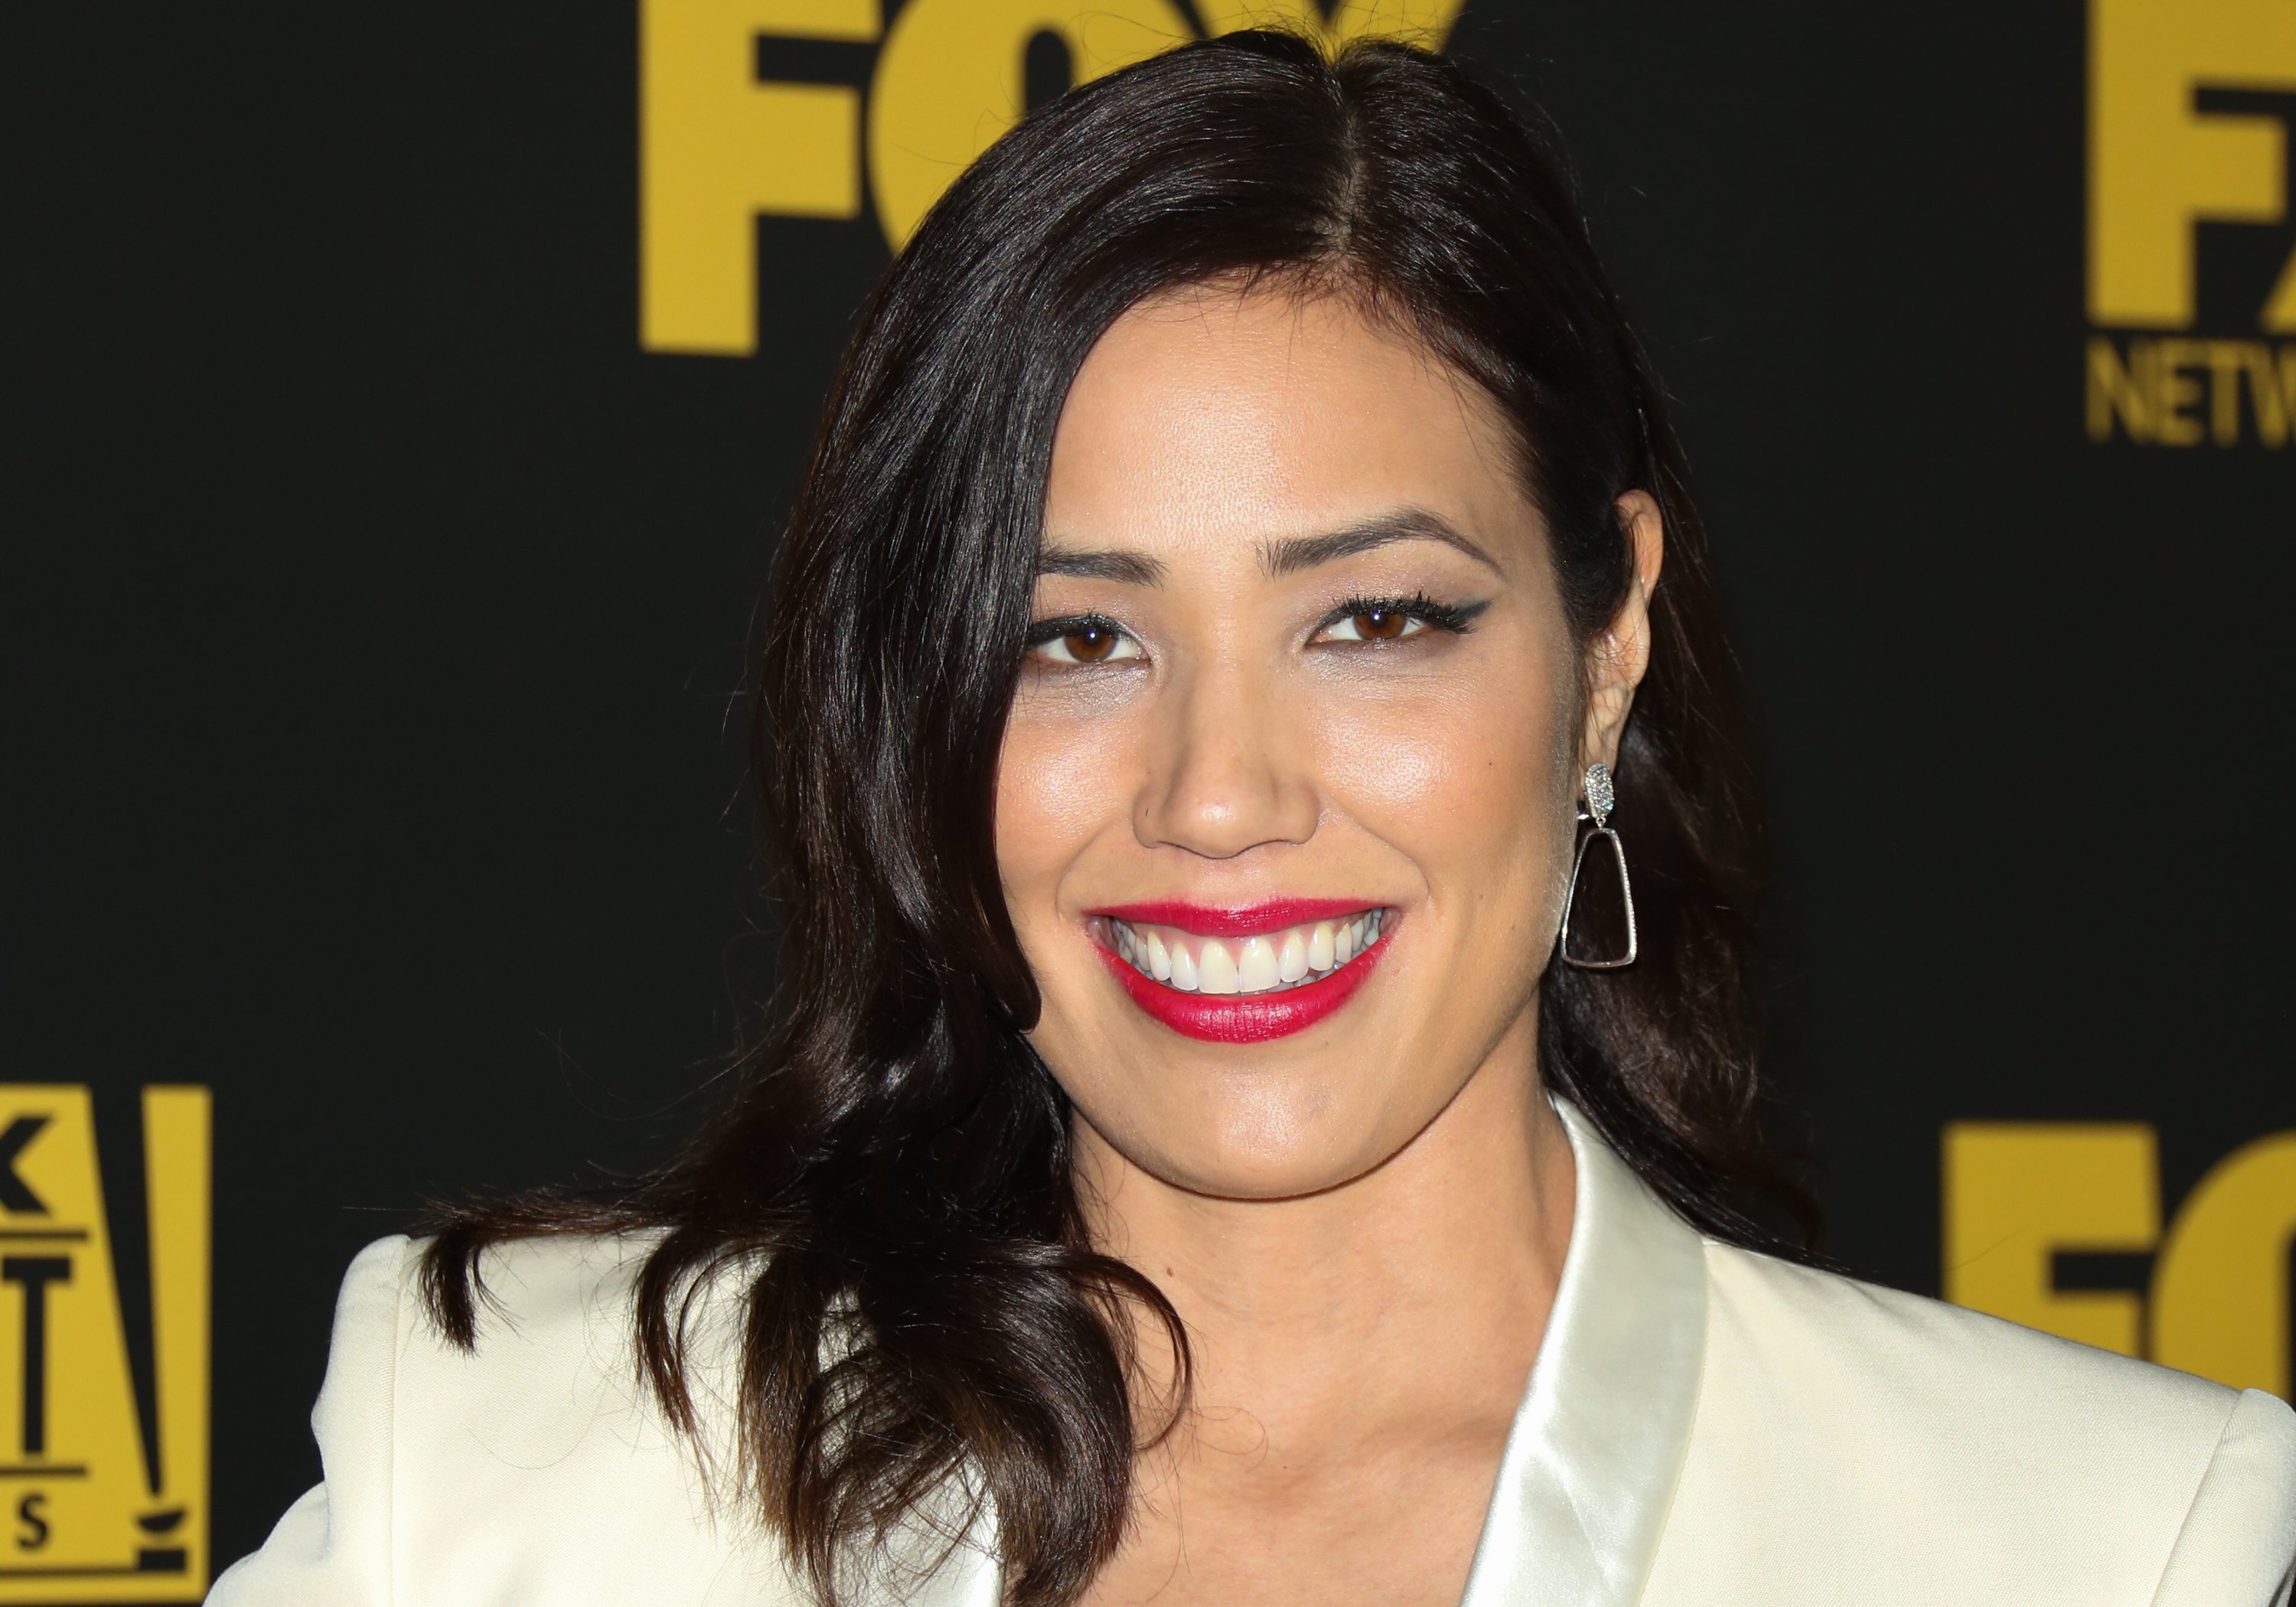 Michaela Conlin attends the Fox and FX's 2016 Golden Globe Awards Party on January 10, 2016, in Beverly Hills, California. | Source: Getty Images.